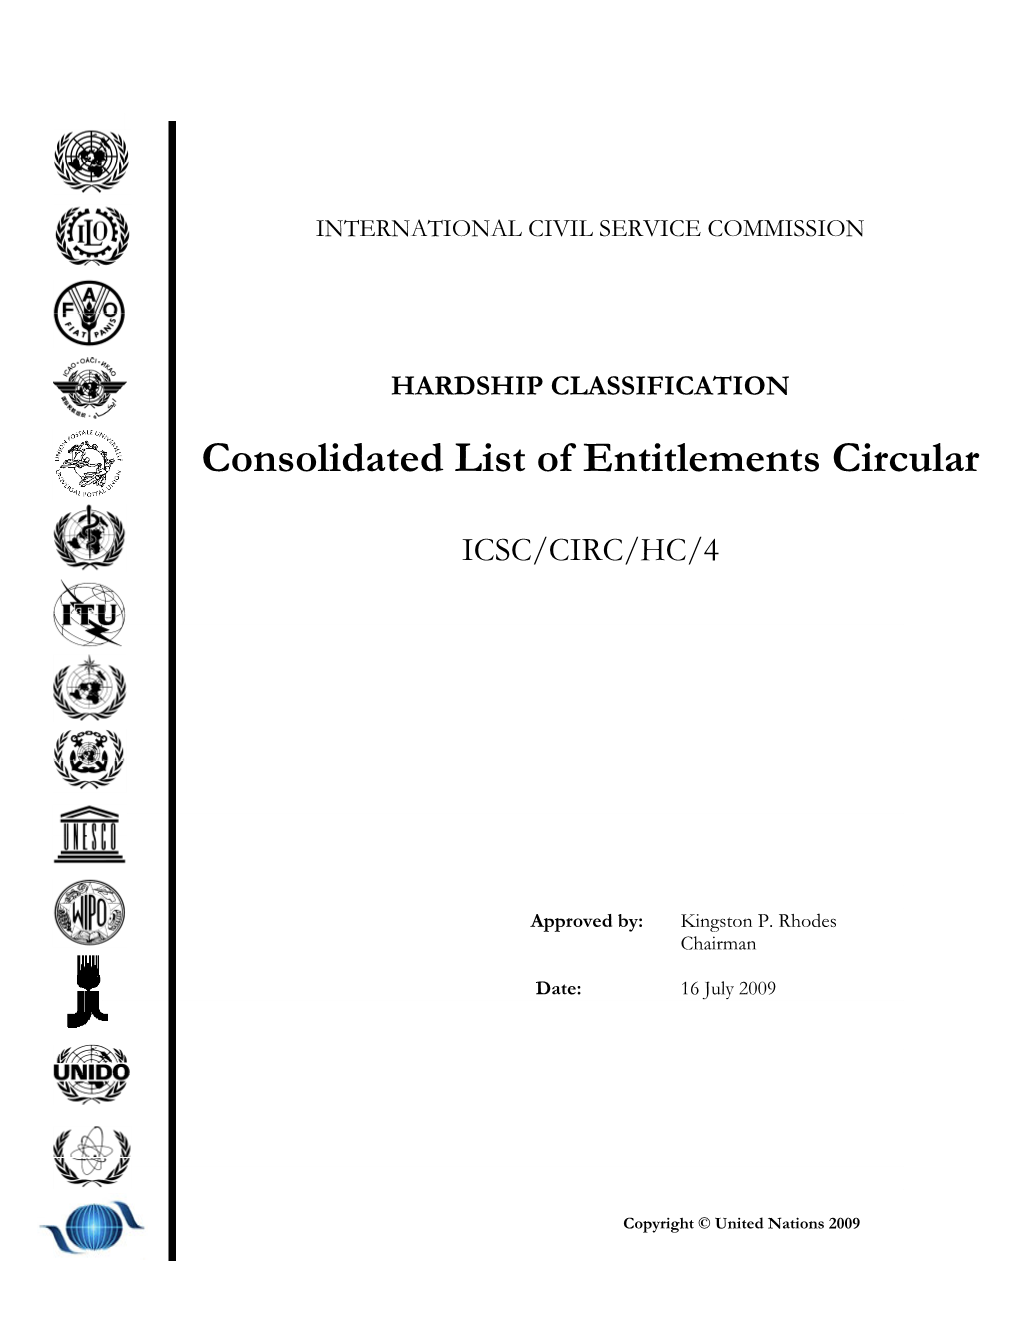 Consolidated List of Entitlements Circular